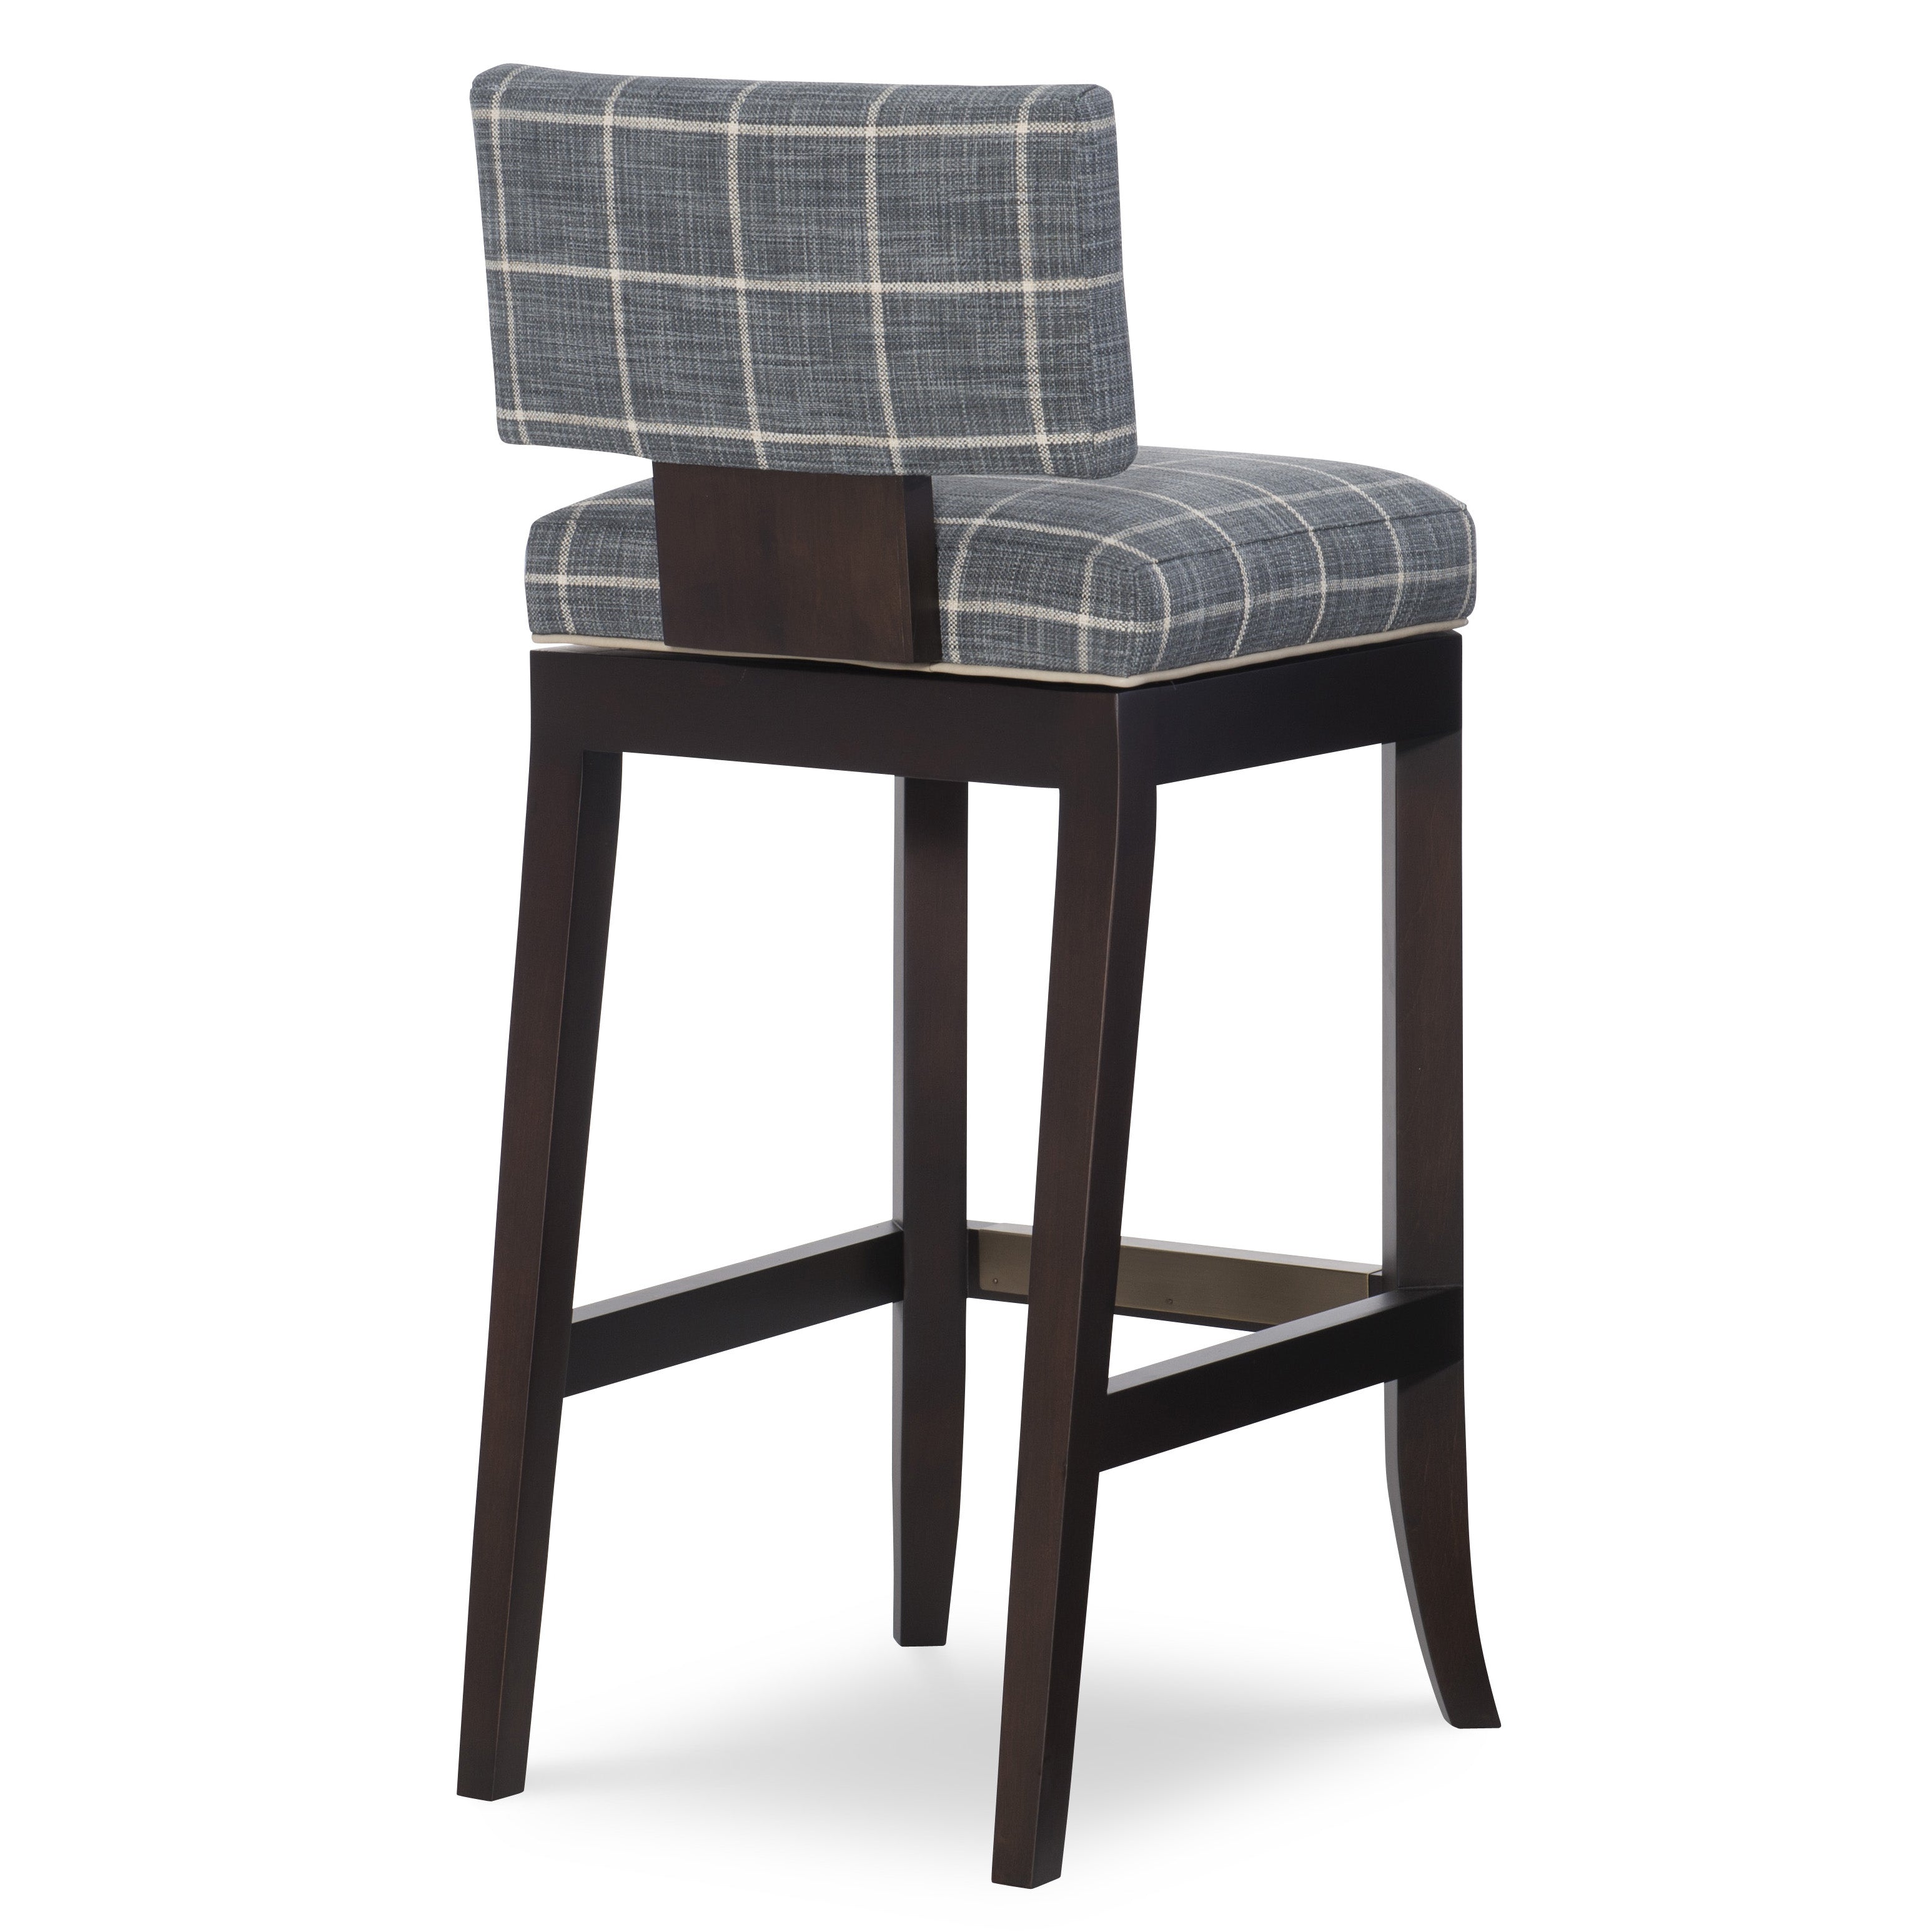 Abbey Bar Stool in Kaluga Slate fabric by Wesley Hall - back view